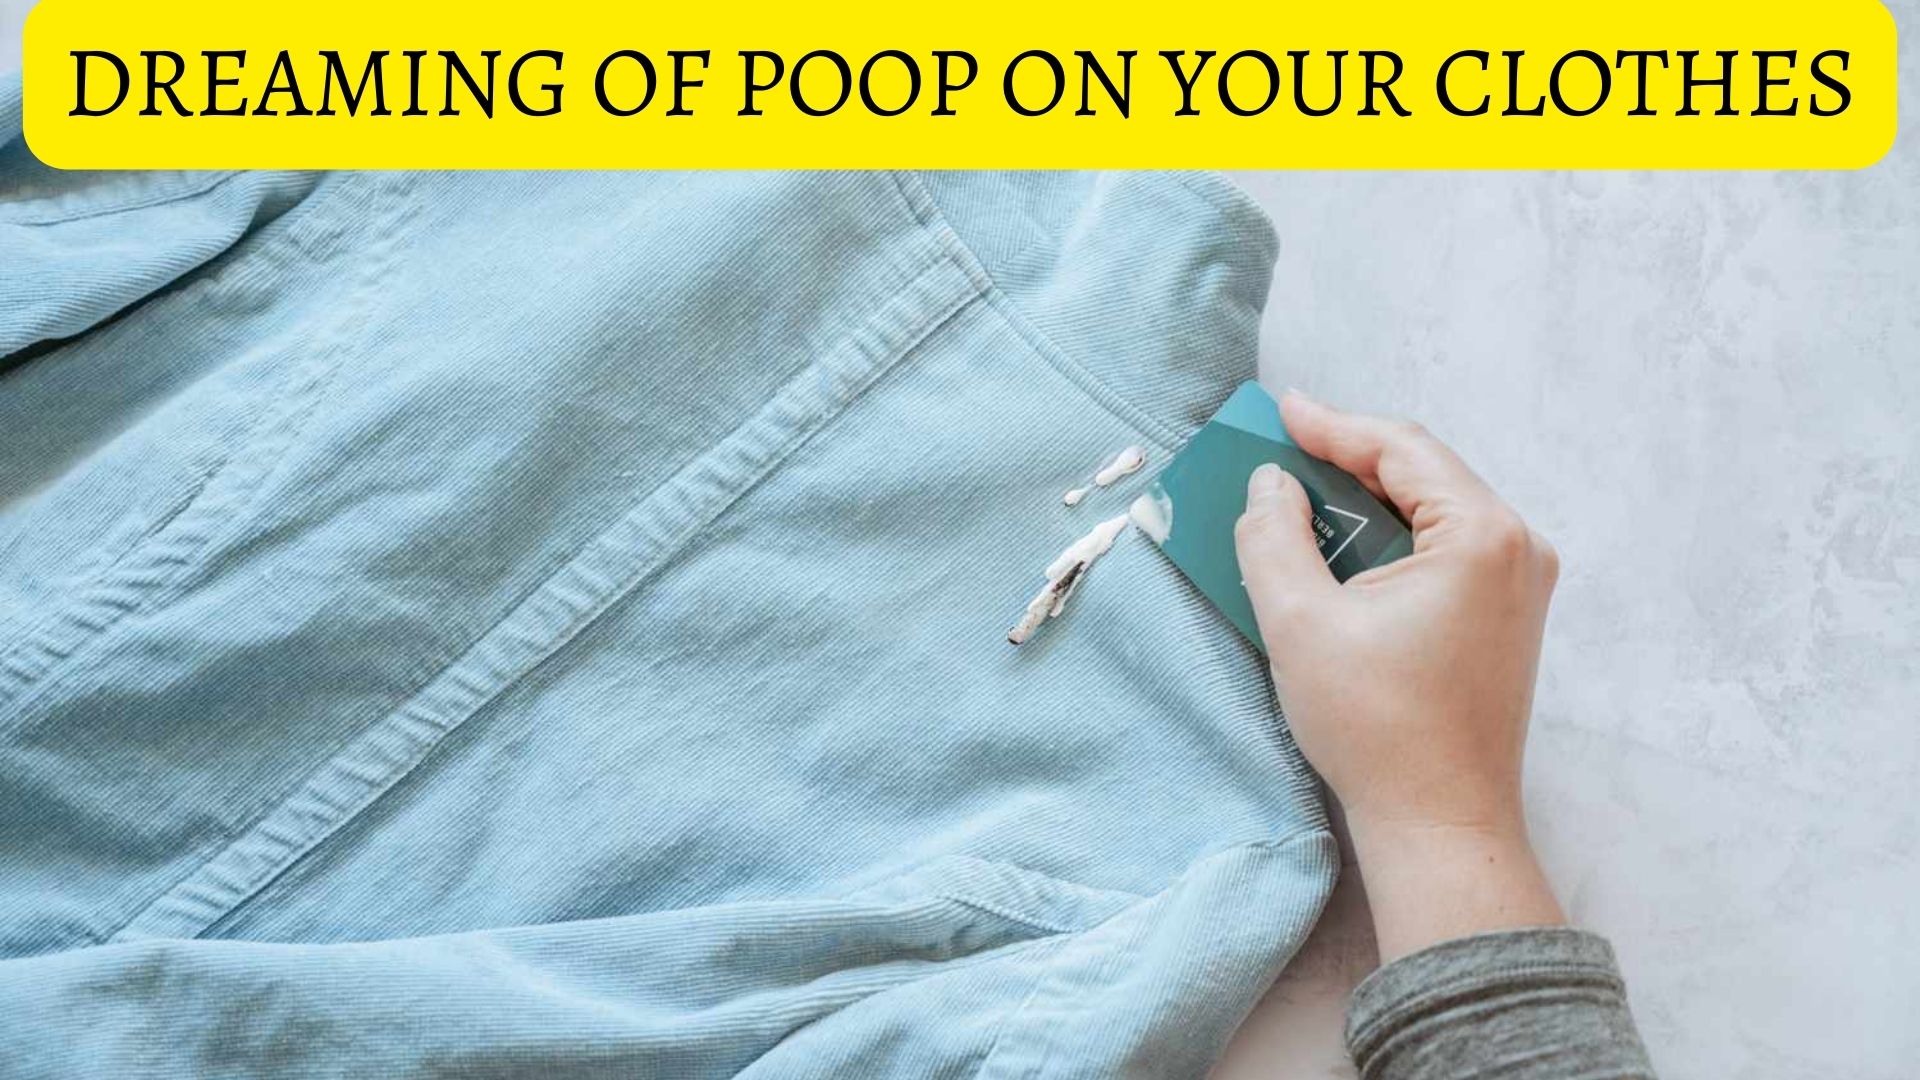 Dreaming Of Poop On Your Clothes - Lessons From Past Mistakes